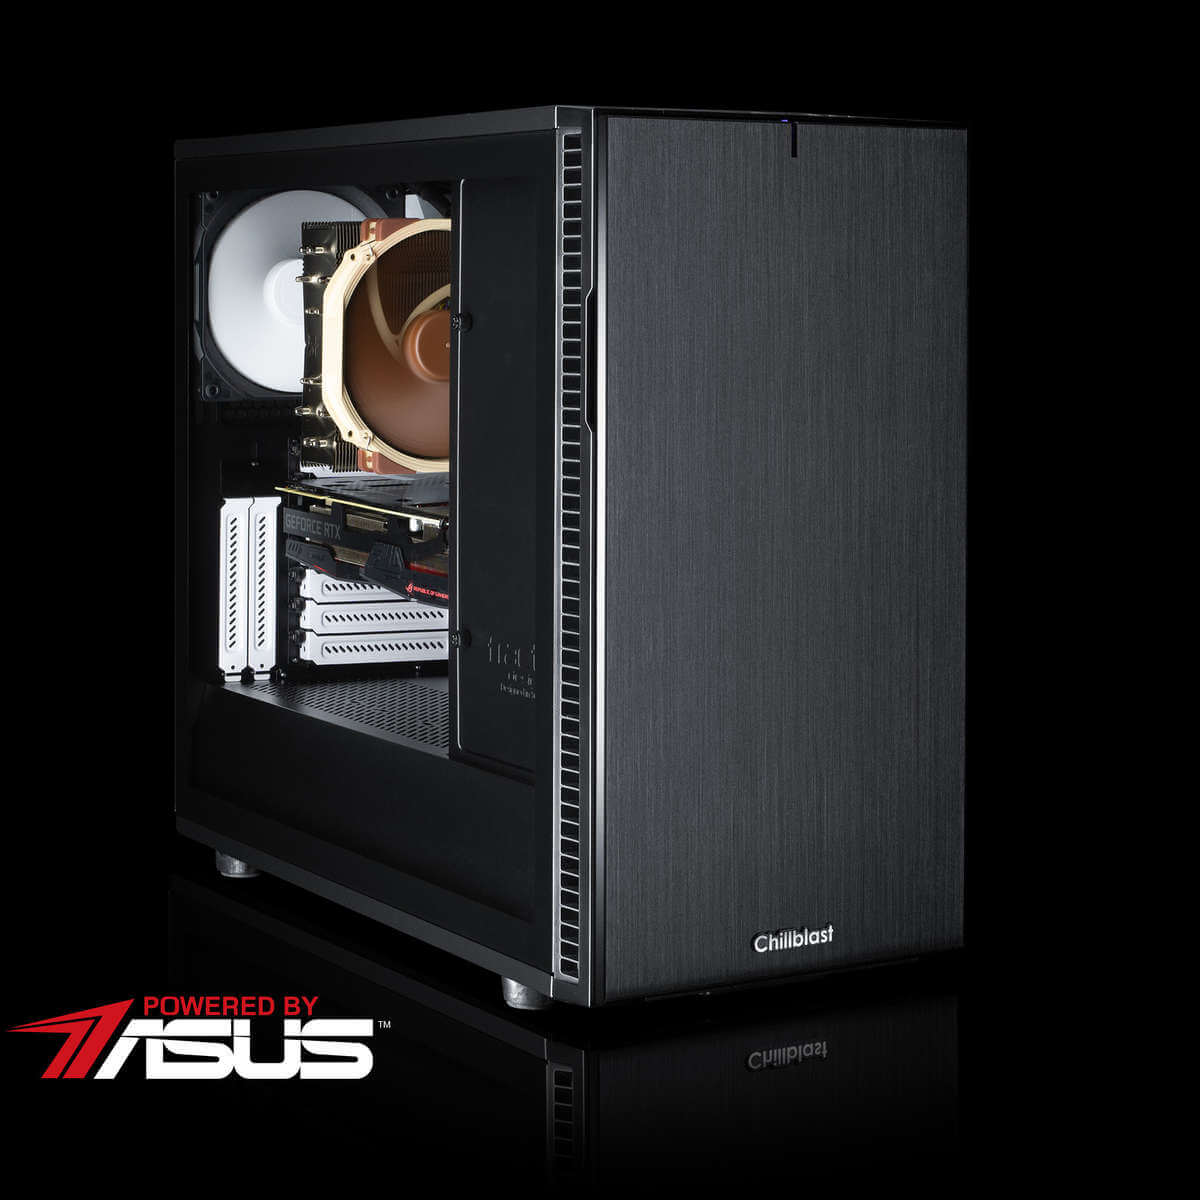 Image of a Chillblast Serenity Elite gaming PC against a black background